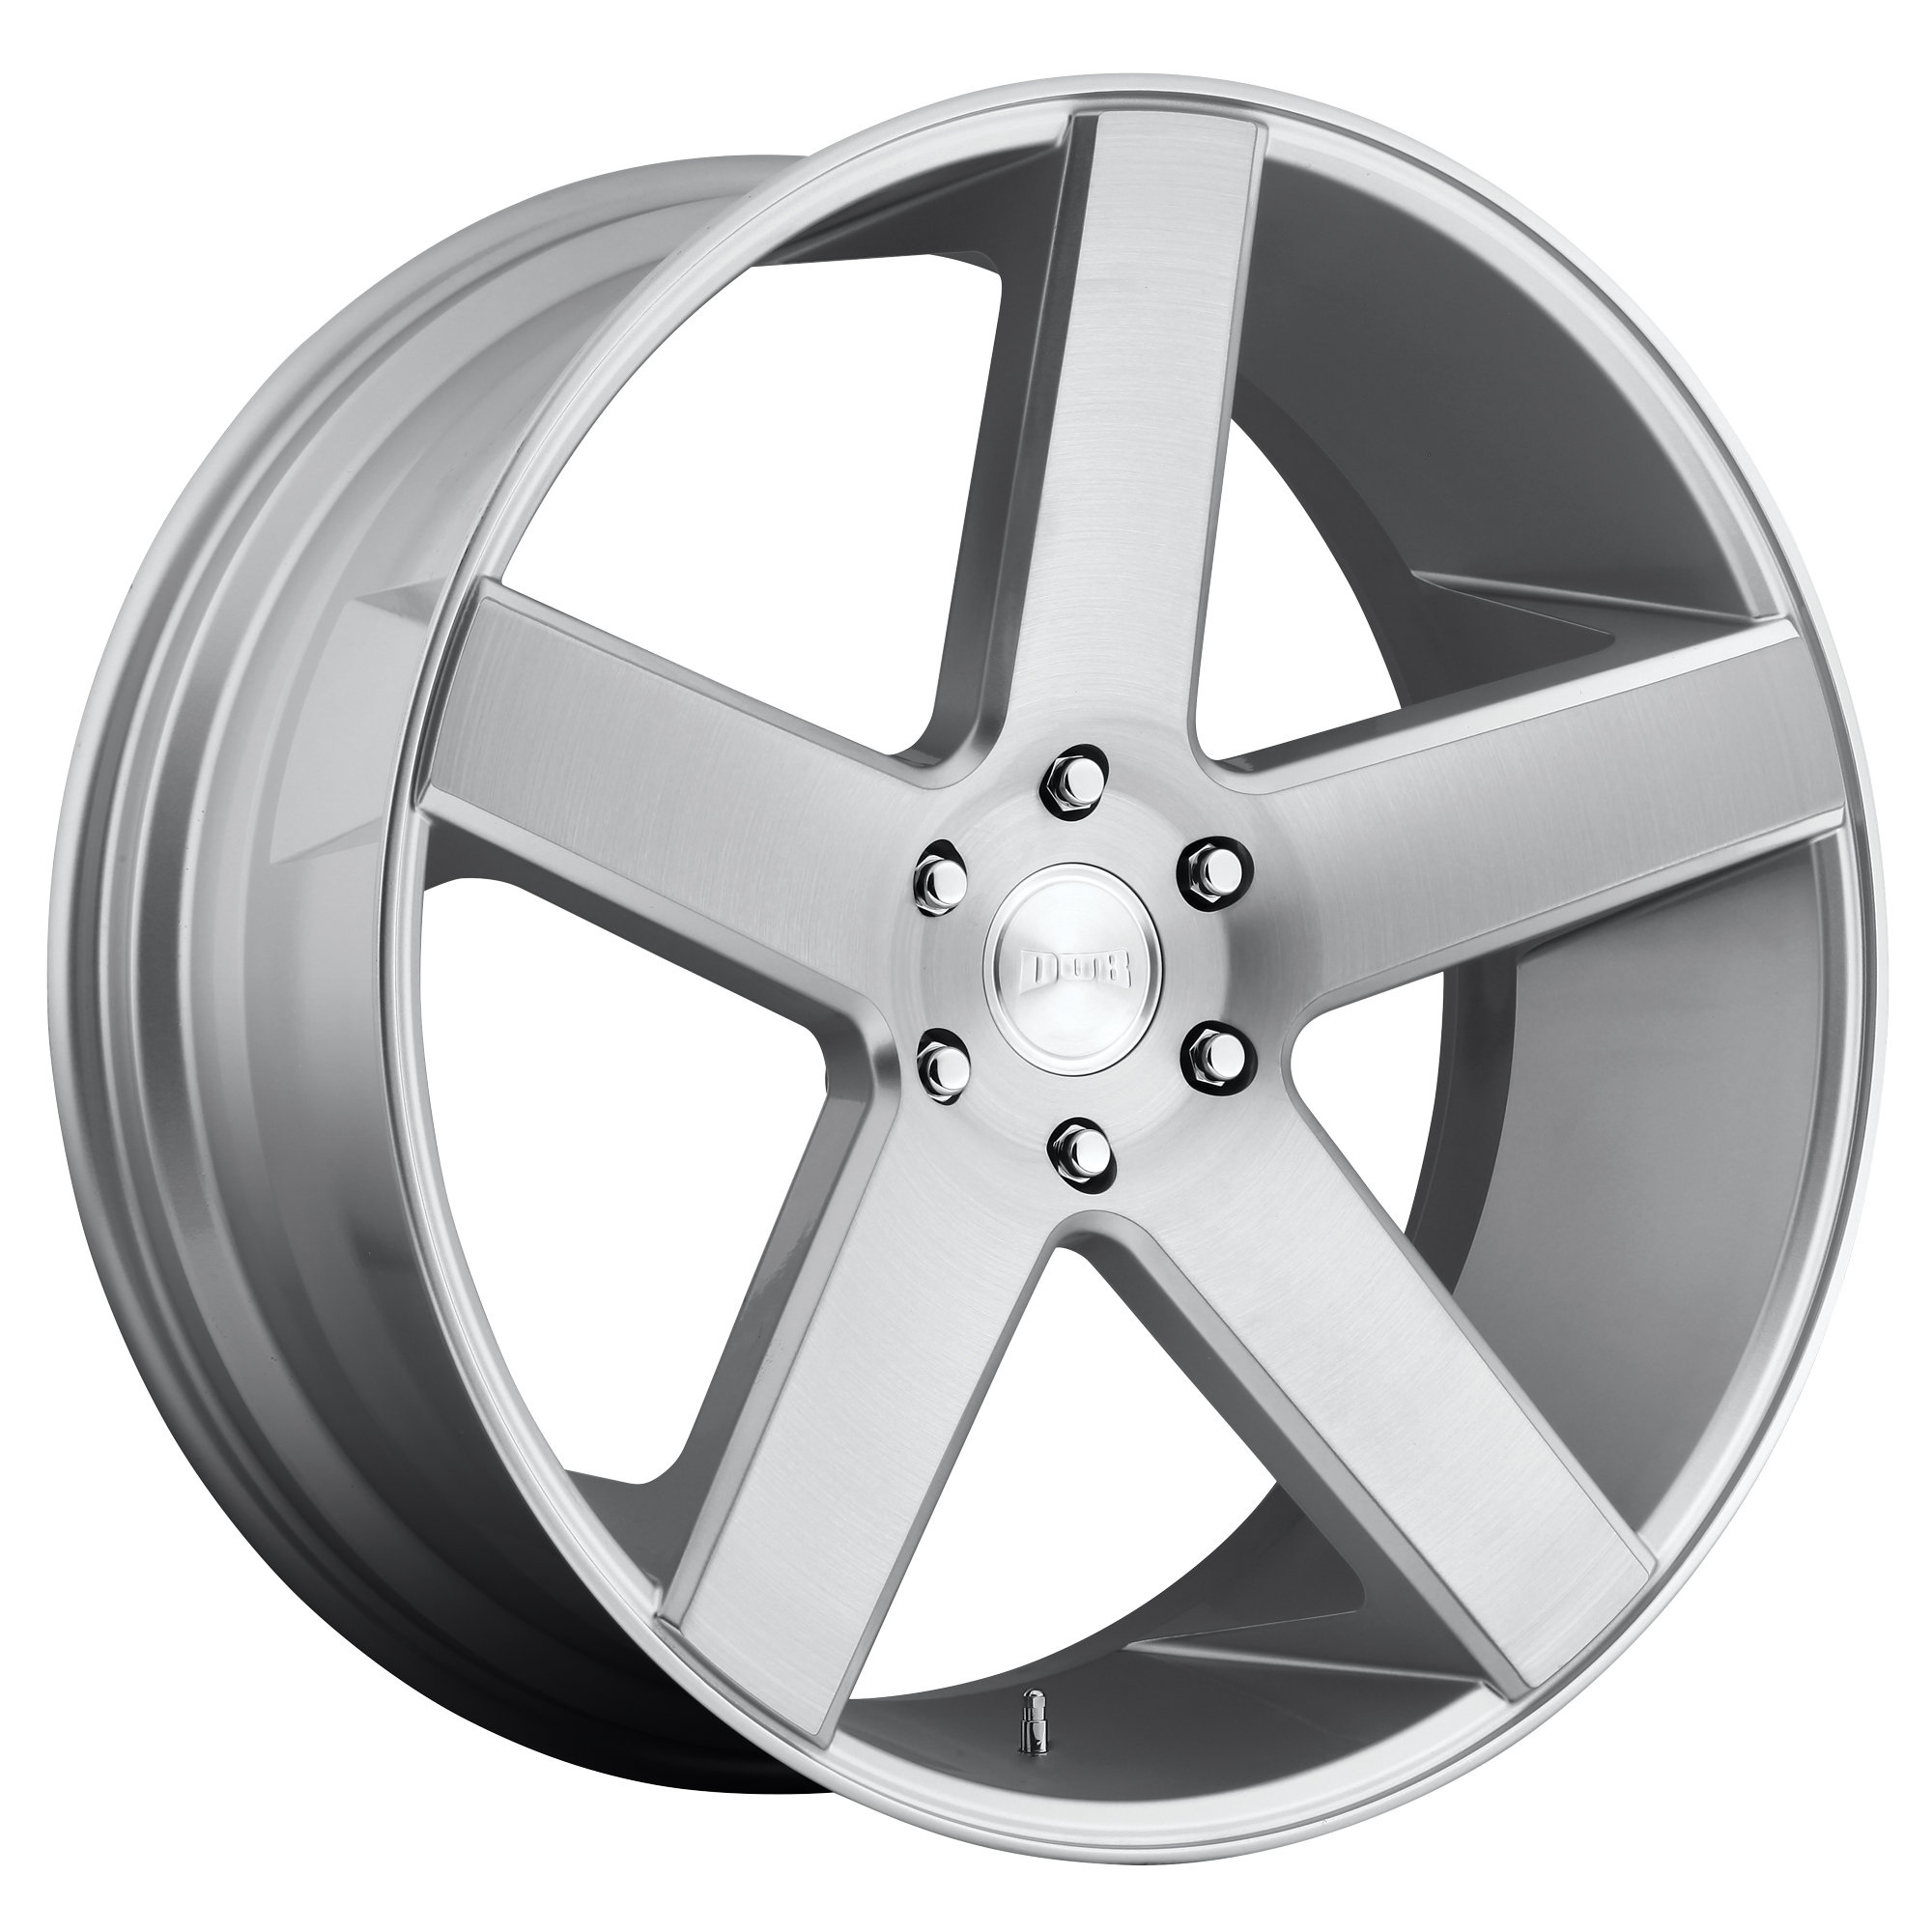 BALLER 22x9.5 6x139.70 GLOSS SILVER BRUSHED (19 mm) - Tires and Engine Performance